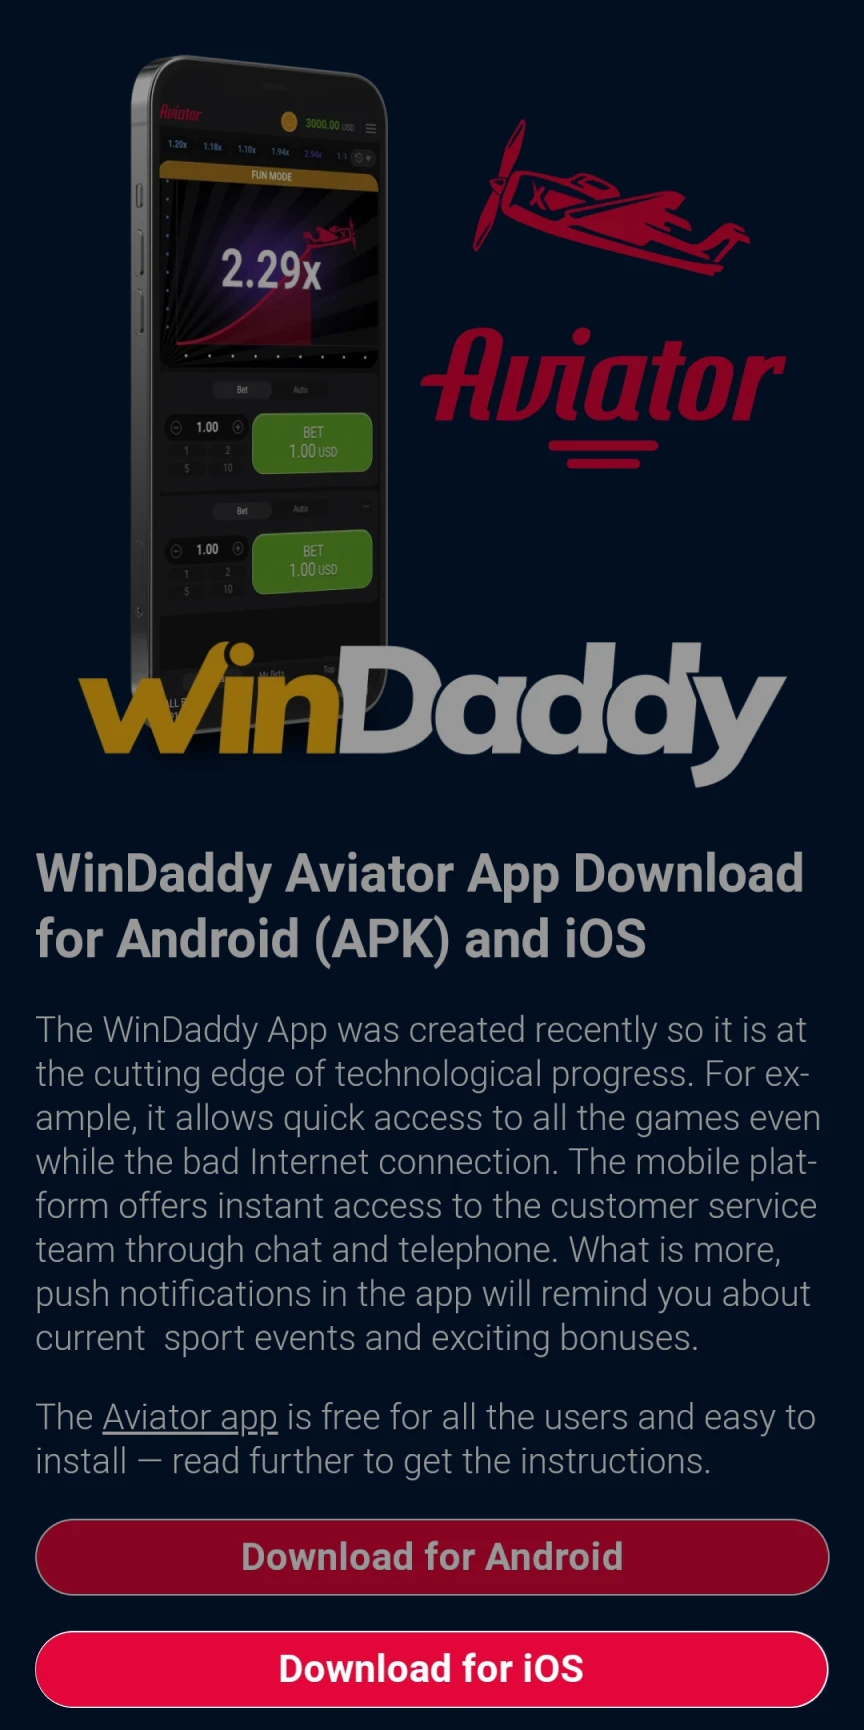 Go to the WinDaddy download page for iOS.